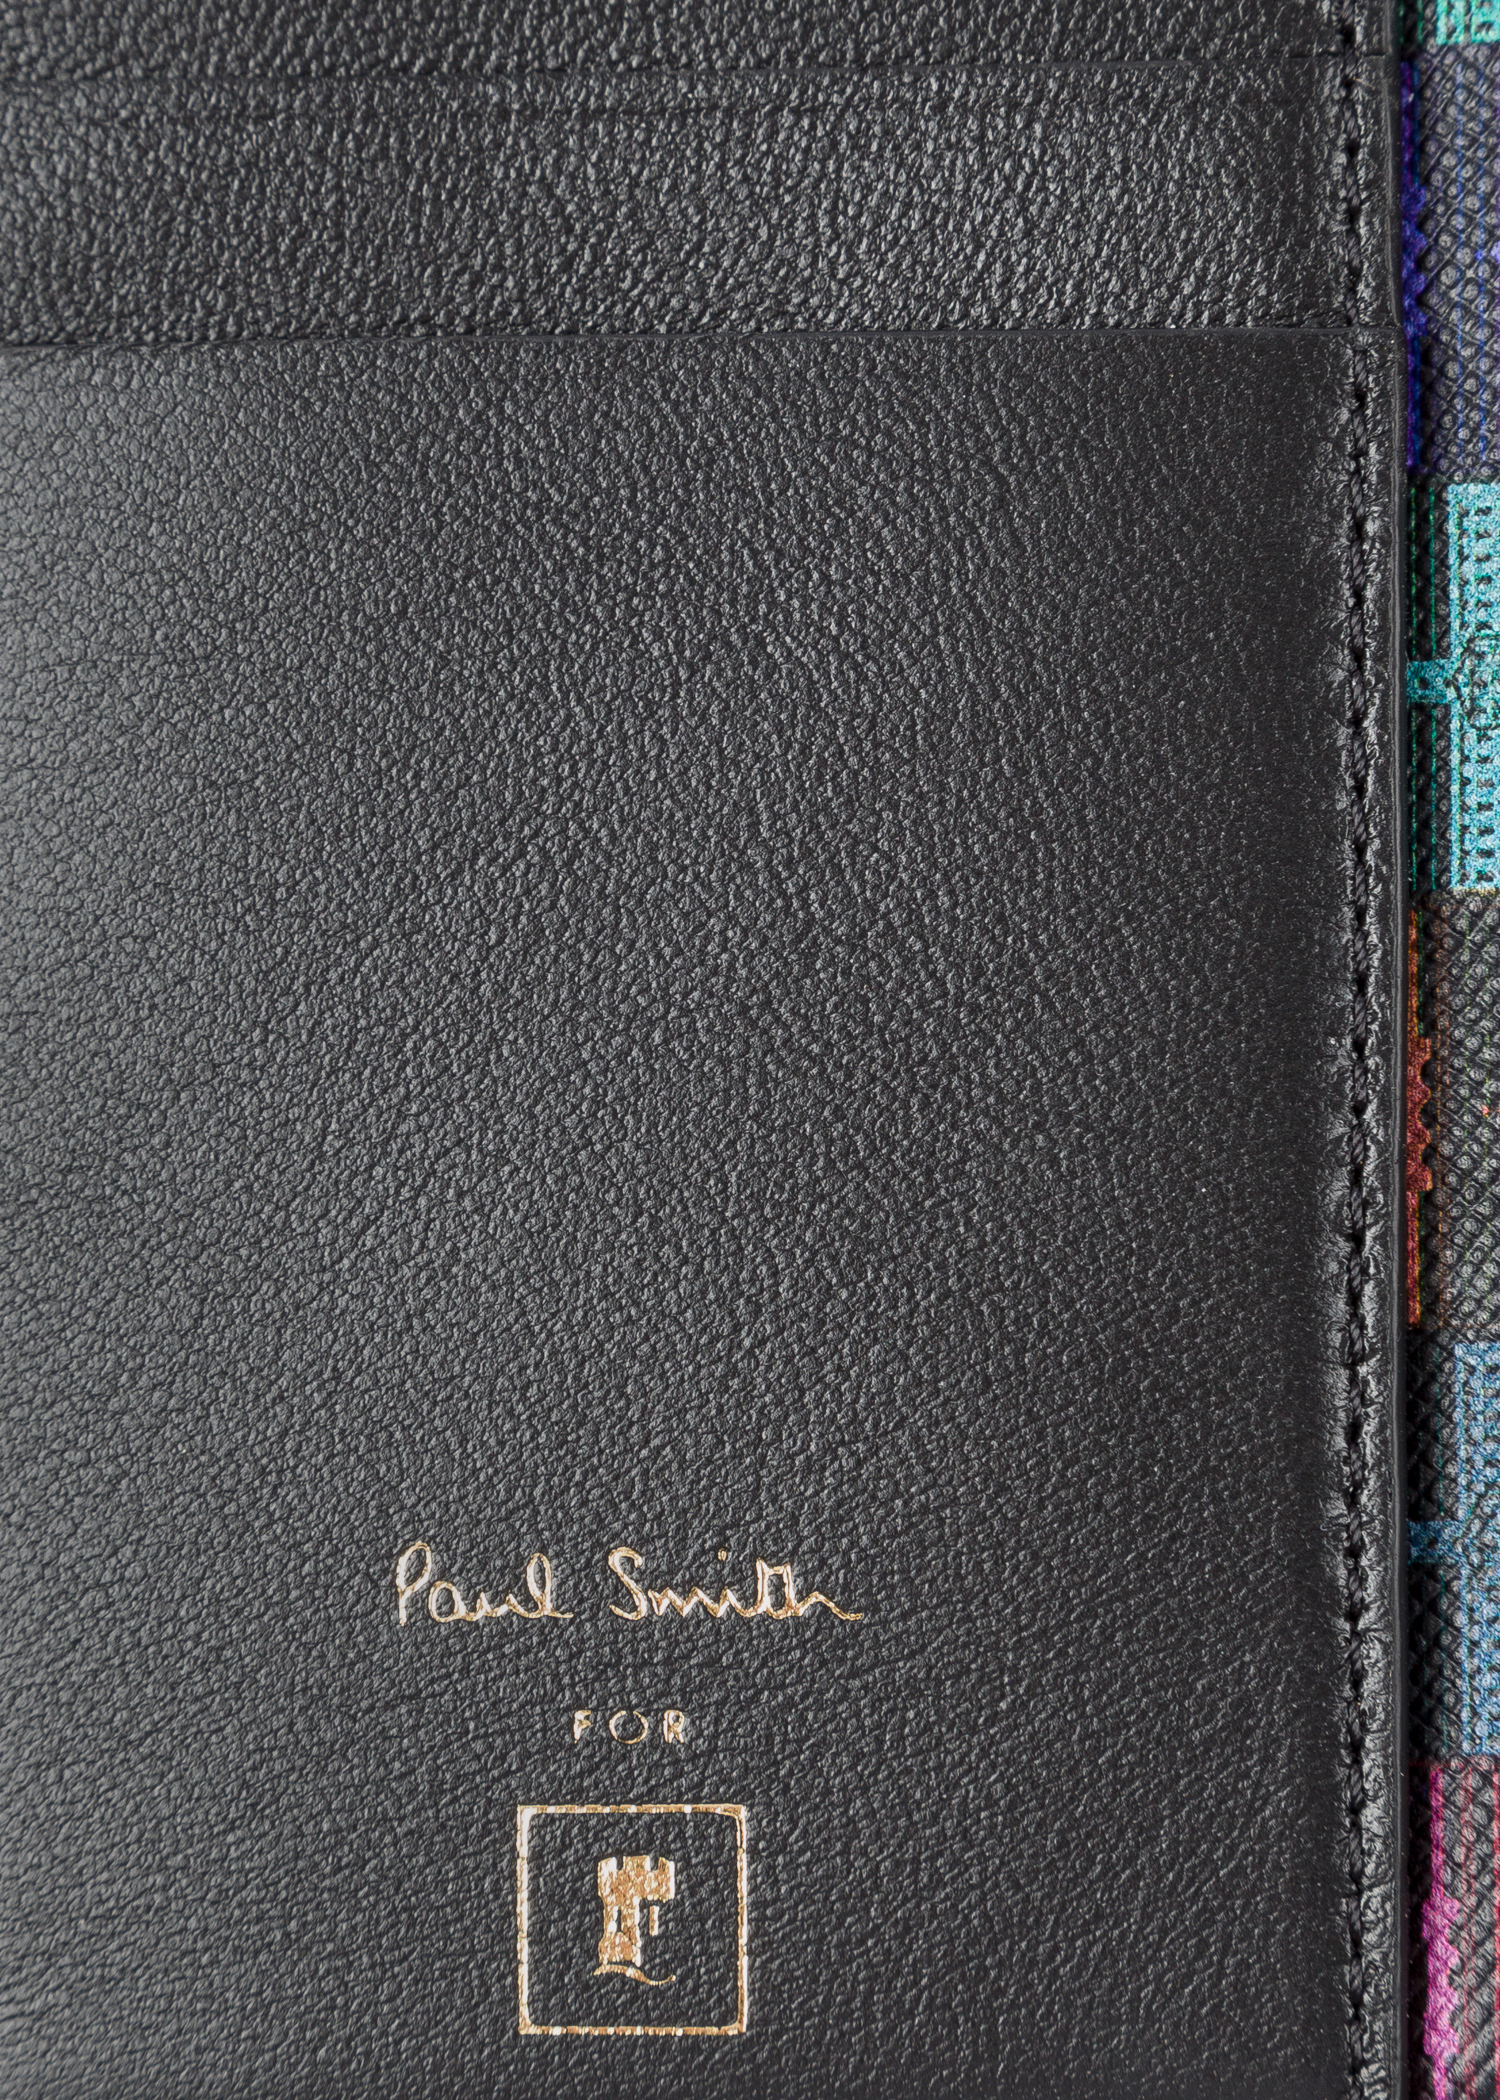 Detail view - Paul Smith For University Of Nottingham - Black 'Trent Building' Leather Zip Pouch Paul Smith